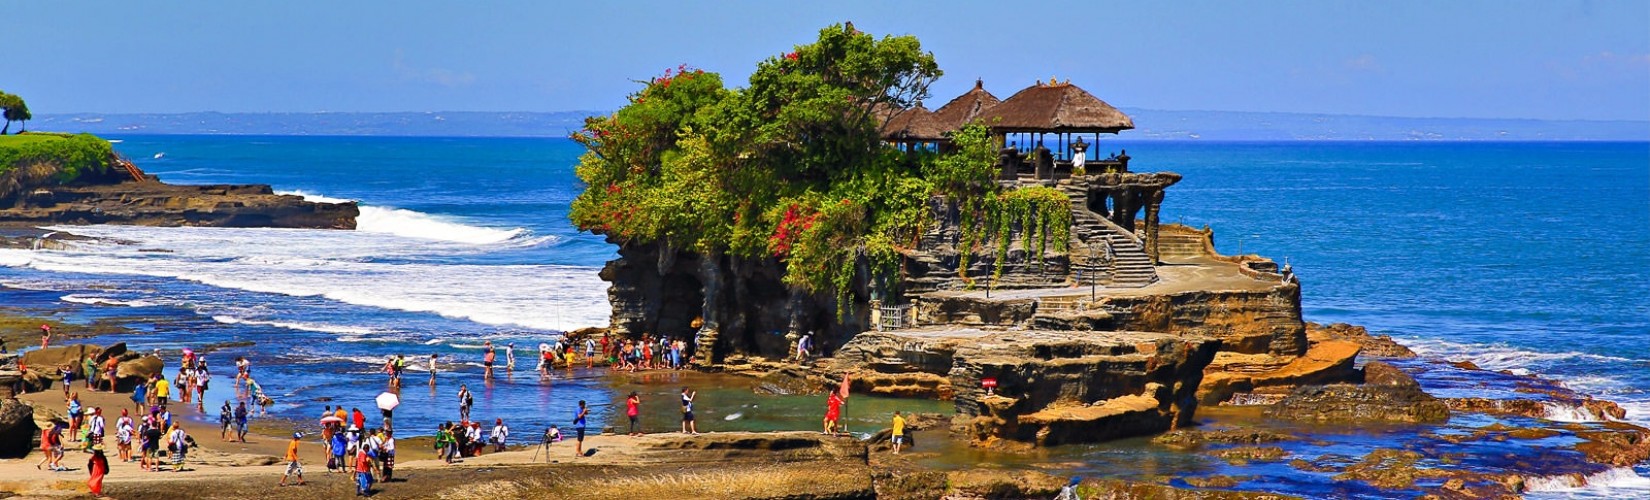 Bali Top experience: Best Things to Do in Bali